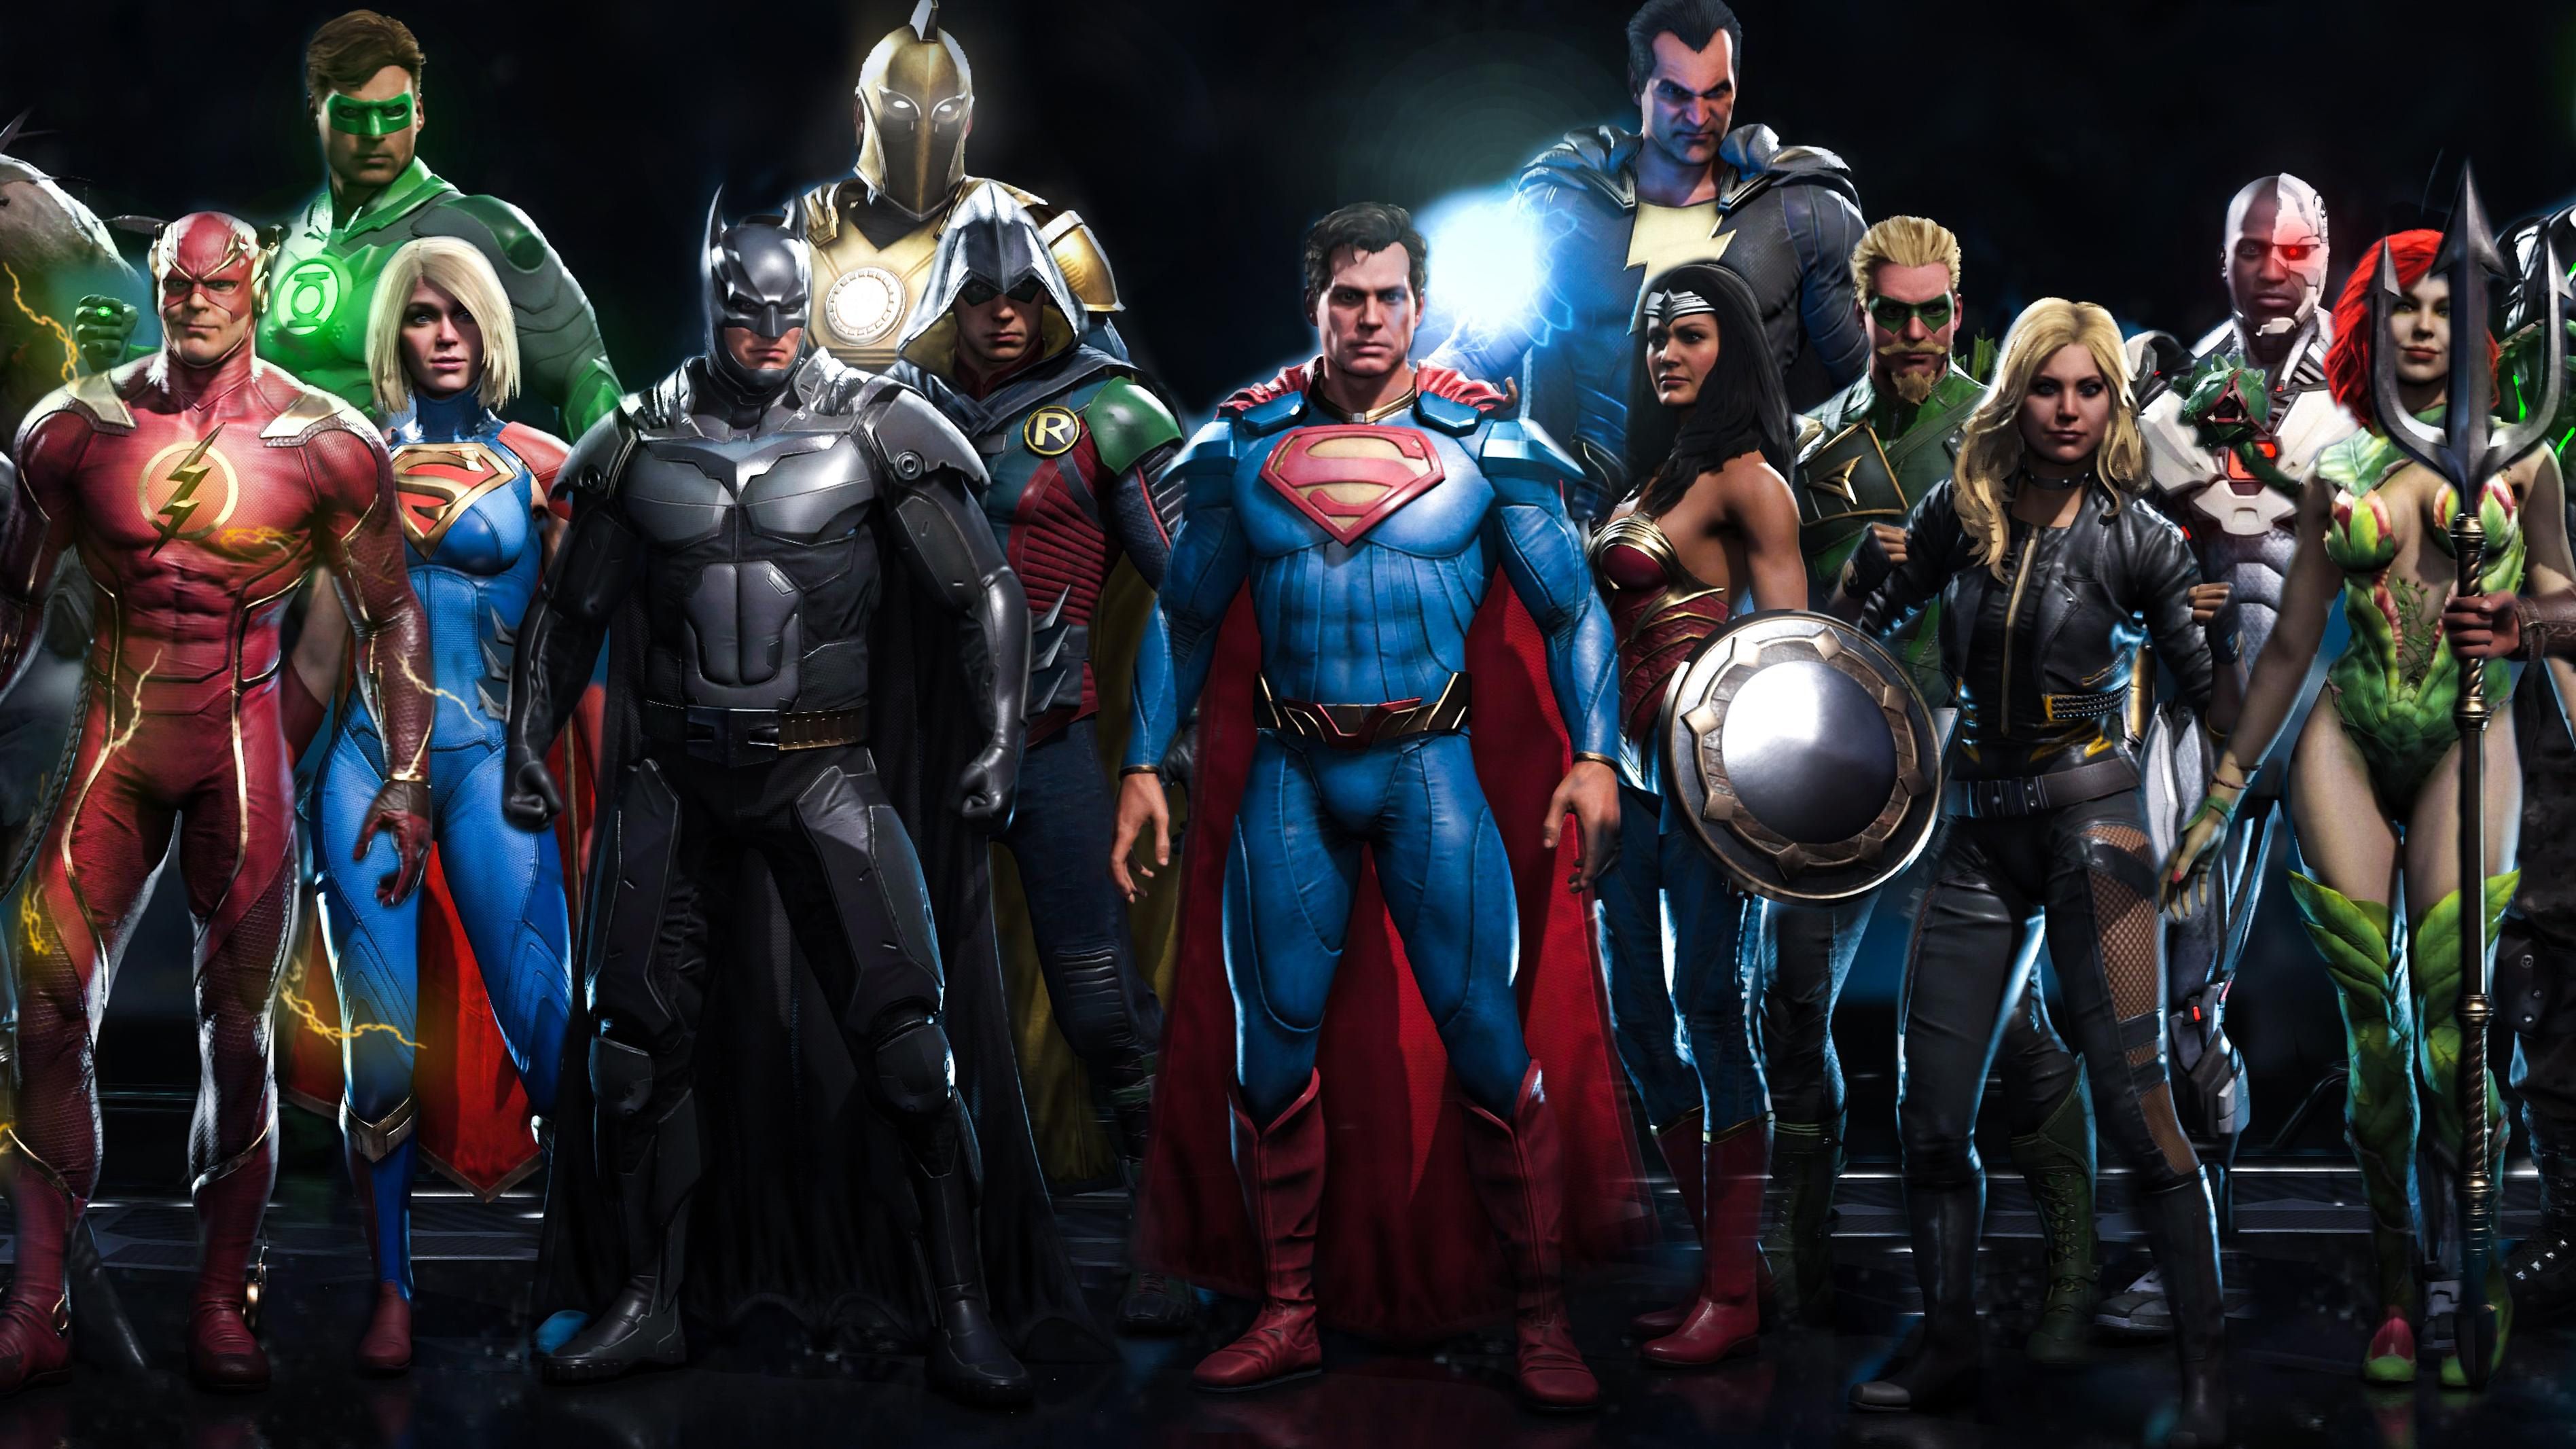 Tons of awesome DC super heroes wallpapers to download for free. 